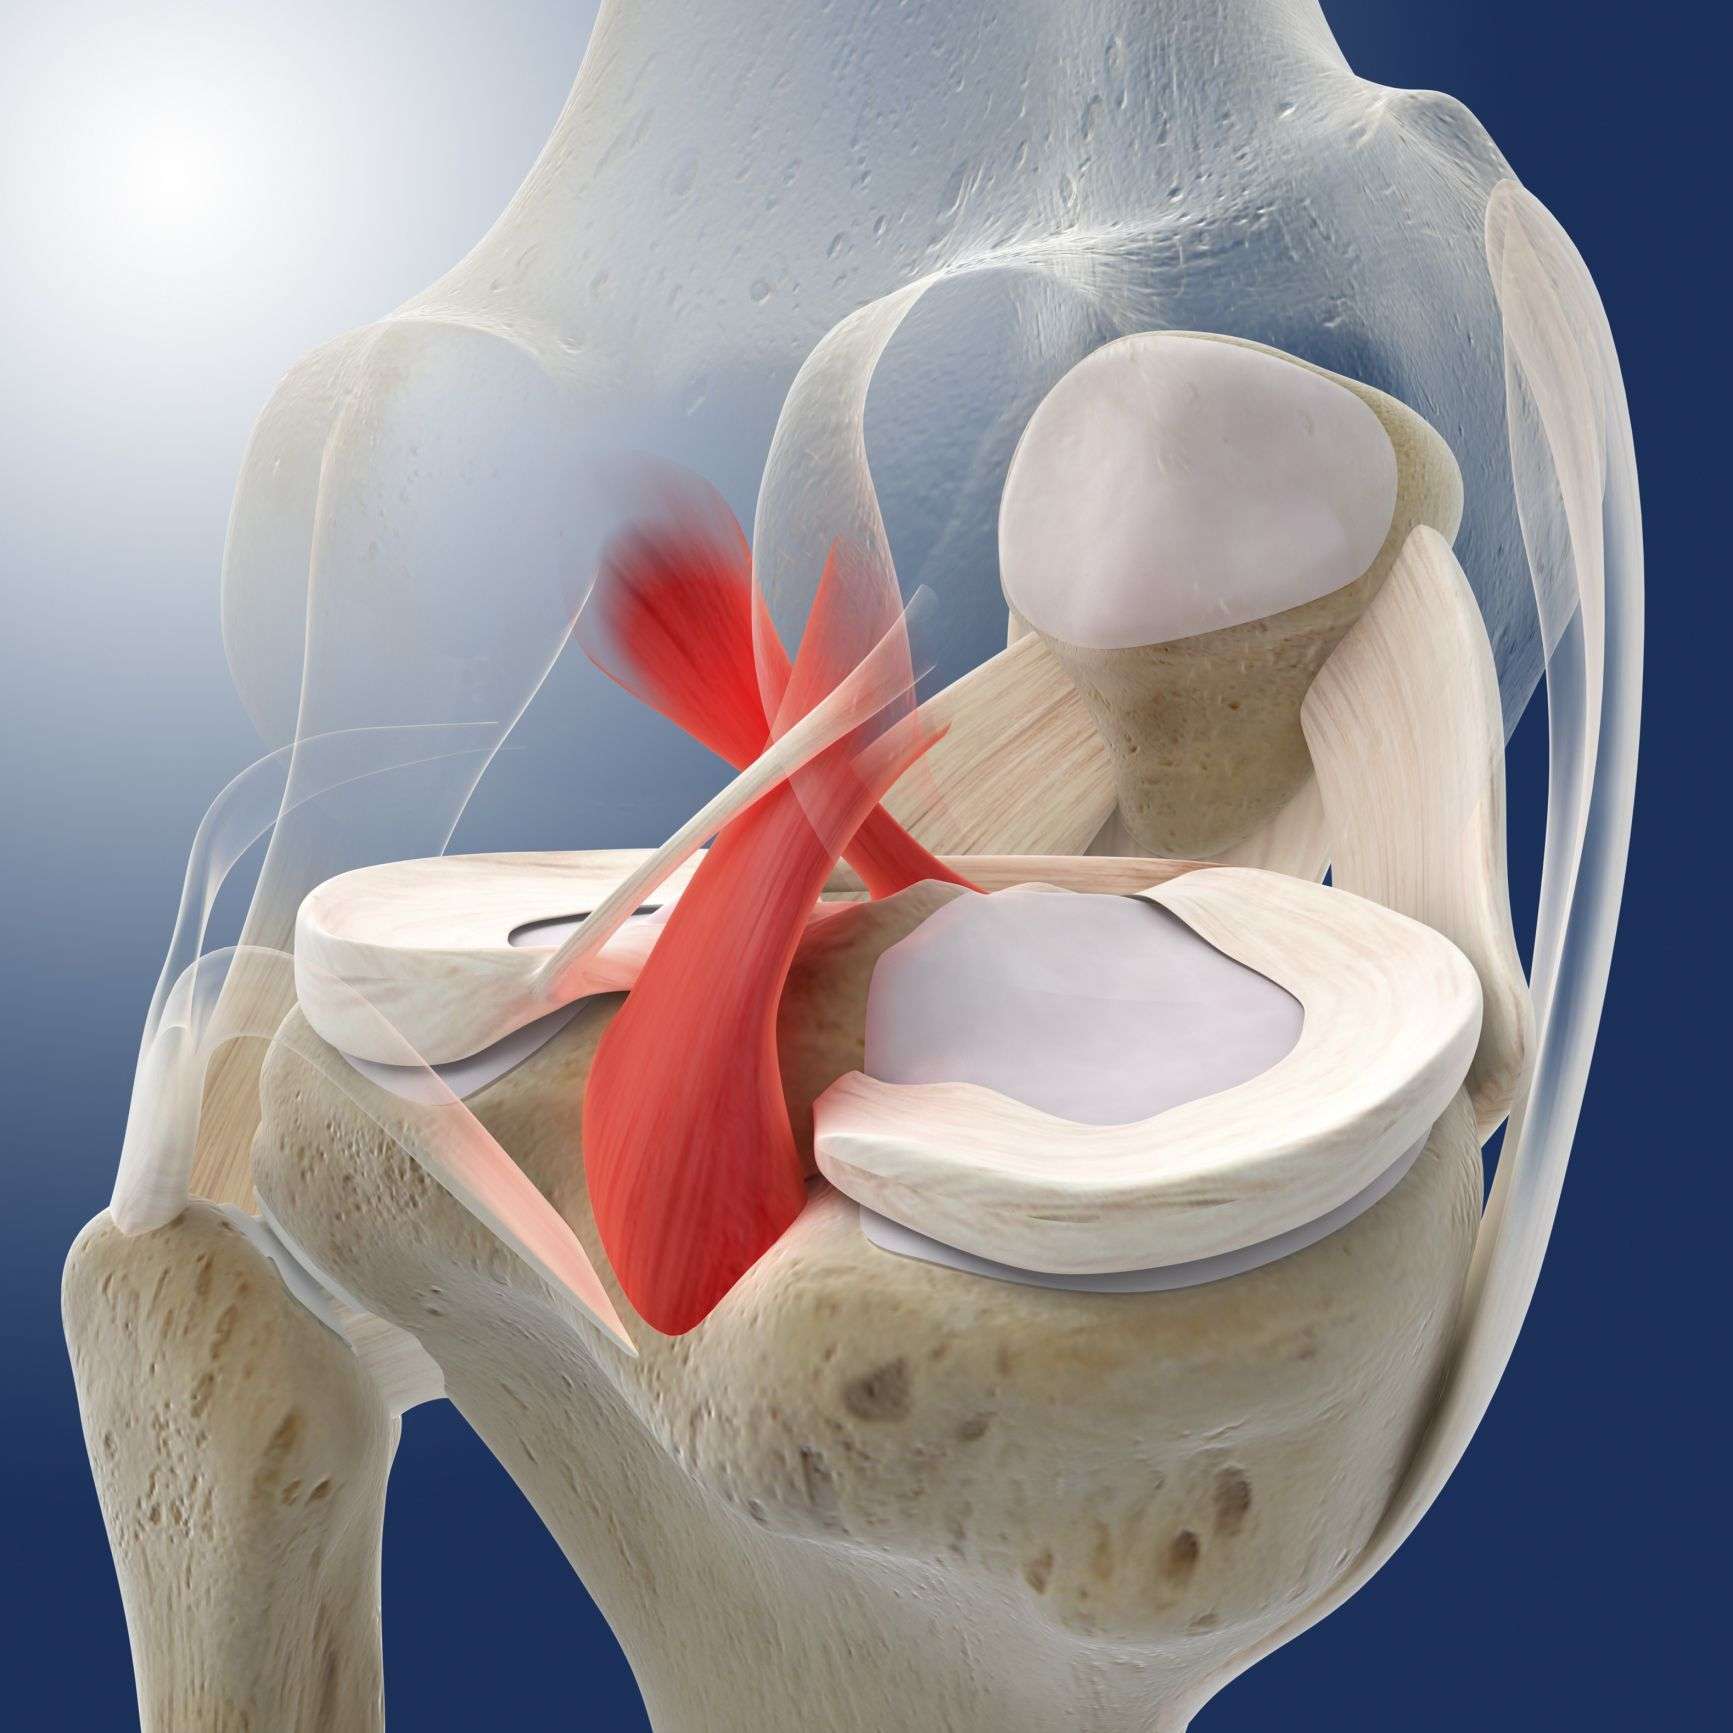 How to Treat the Painful Injury of a Posterior Cruciate ...